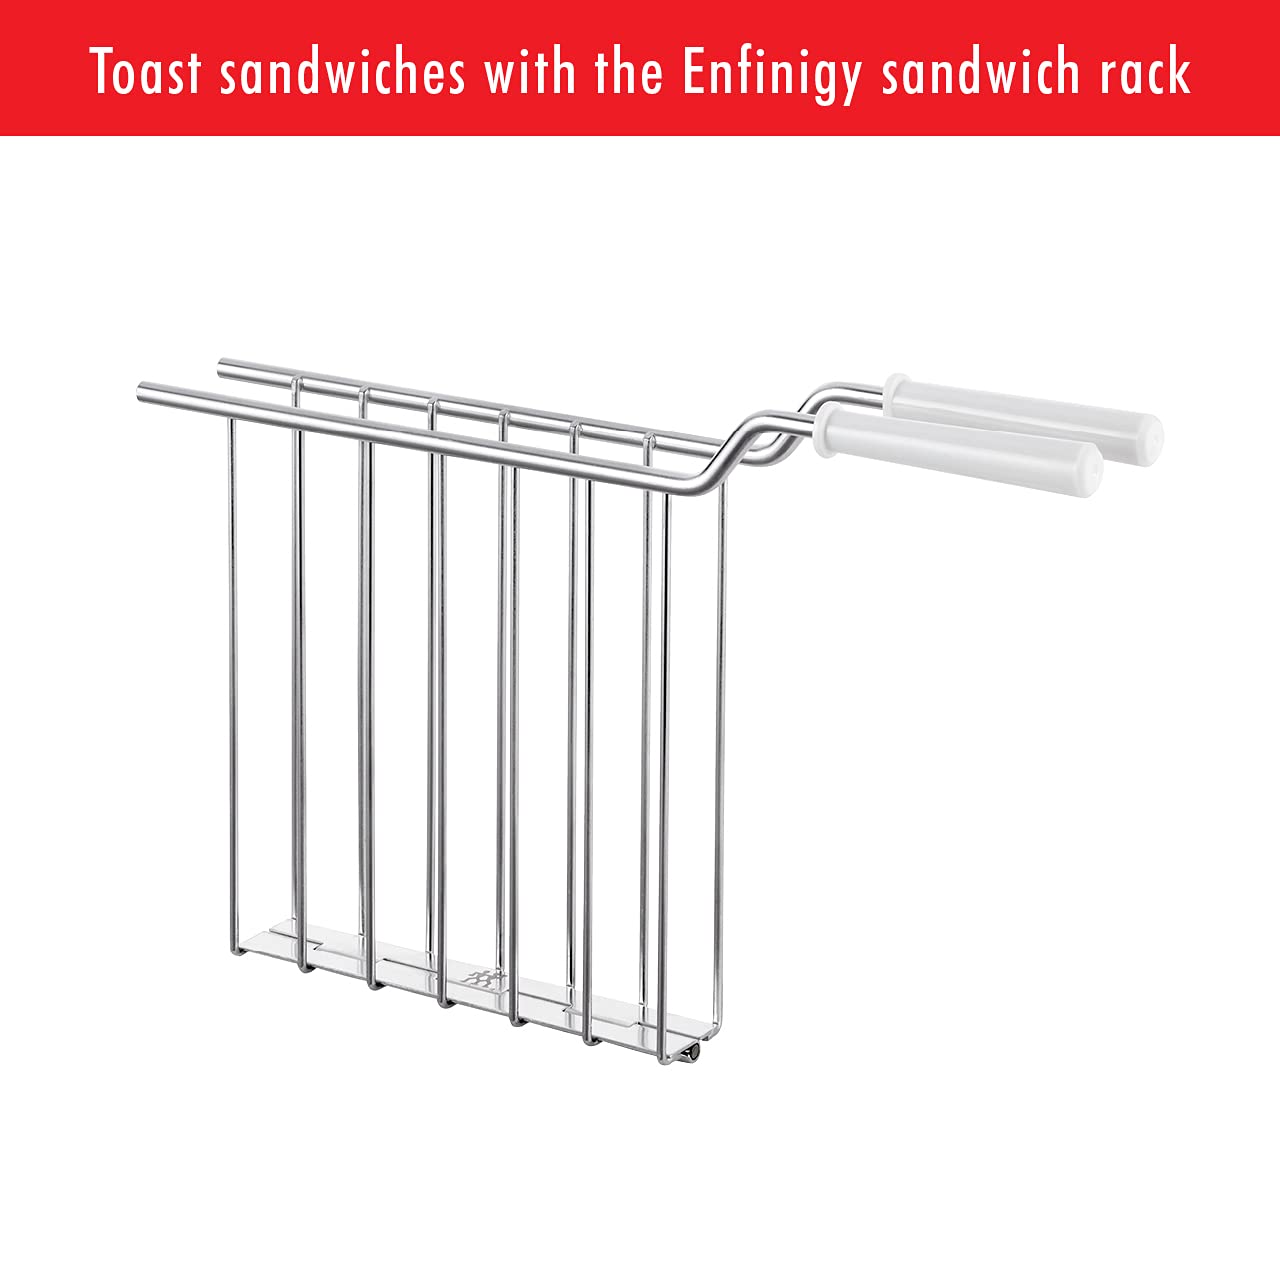 ZWILLING Enfinigy Cool Touch Toaster 2 Slice with Extra Wide 1.5